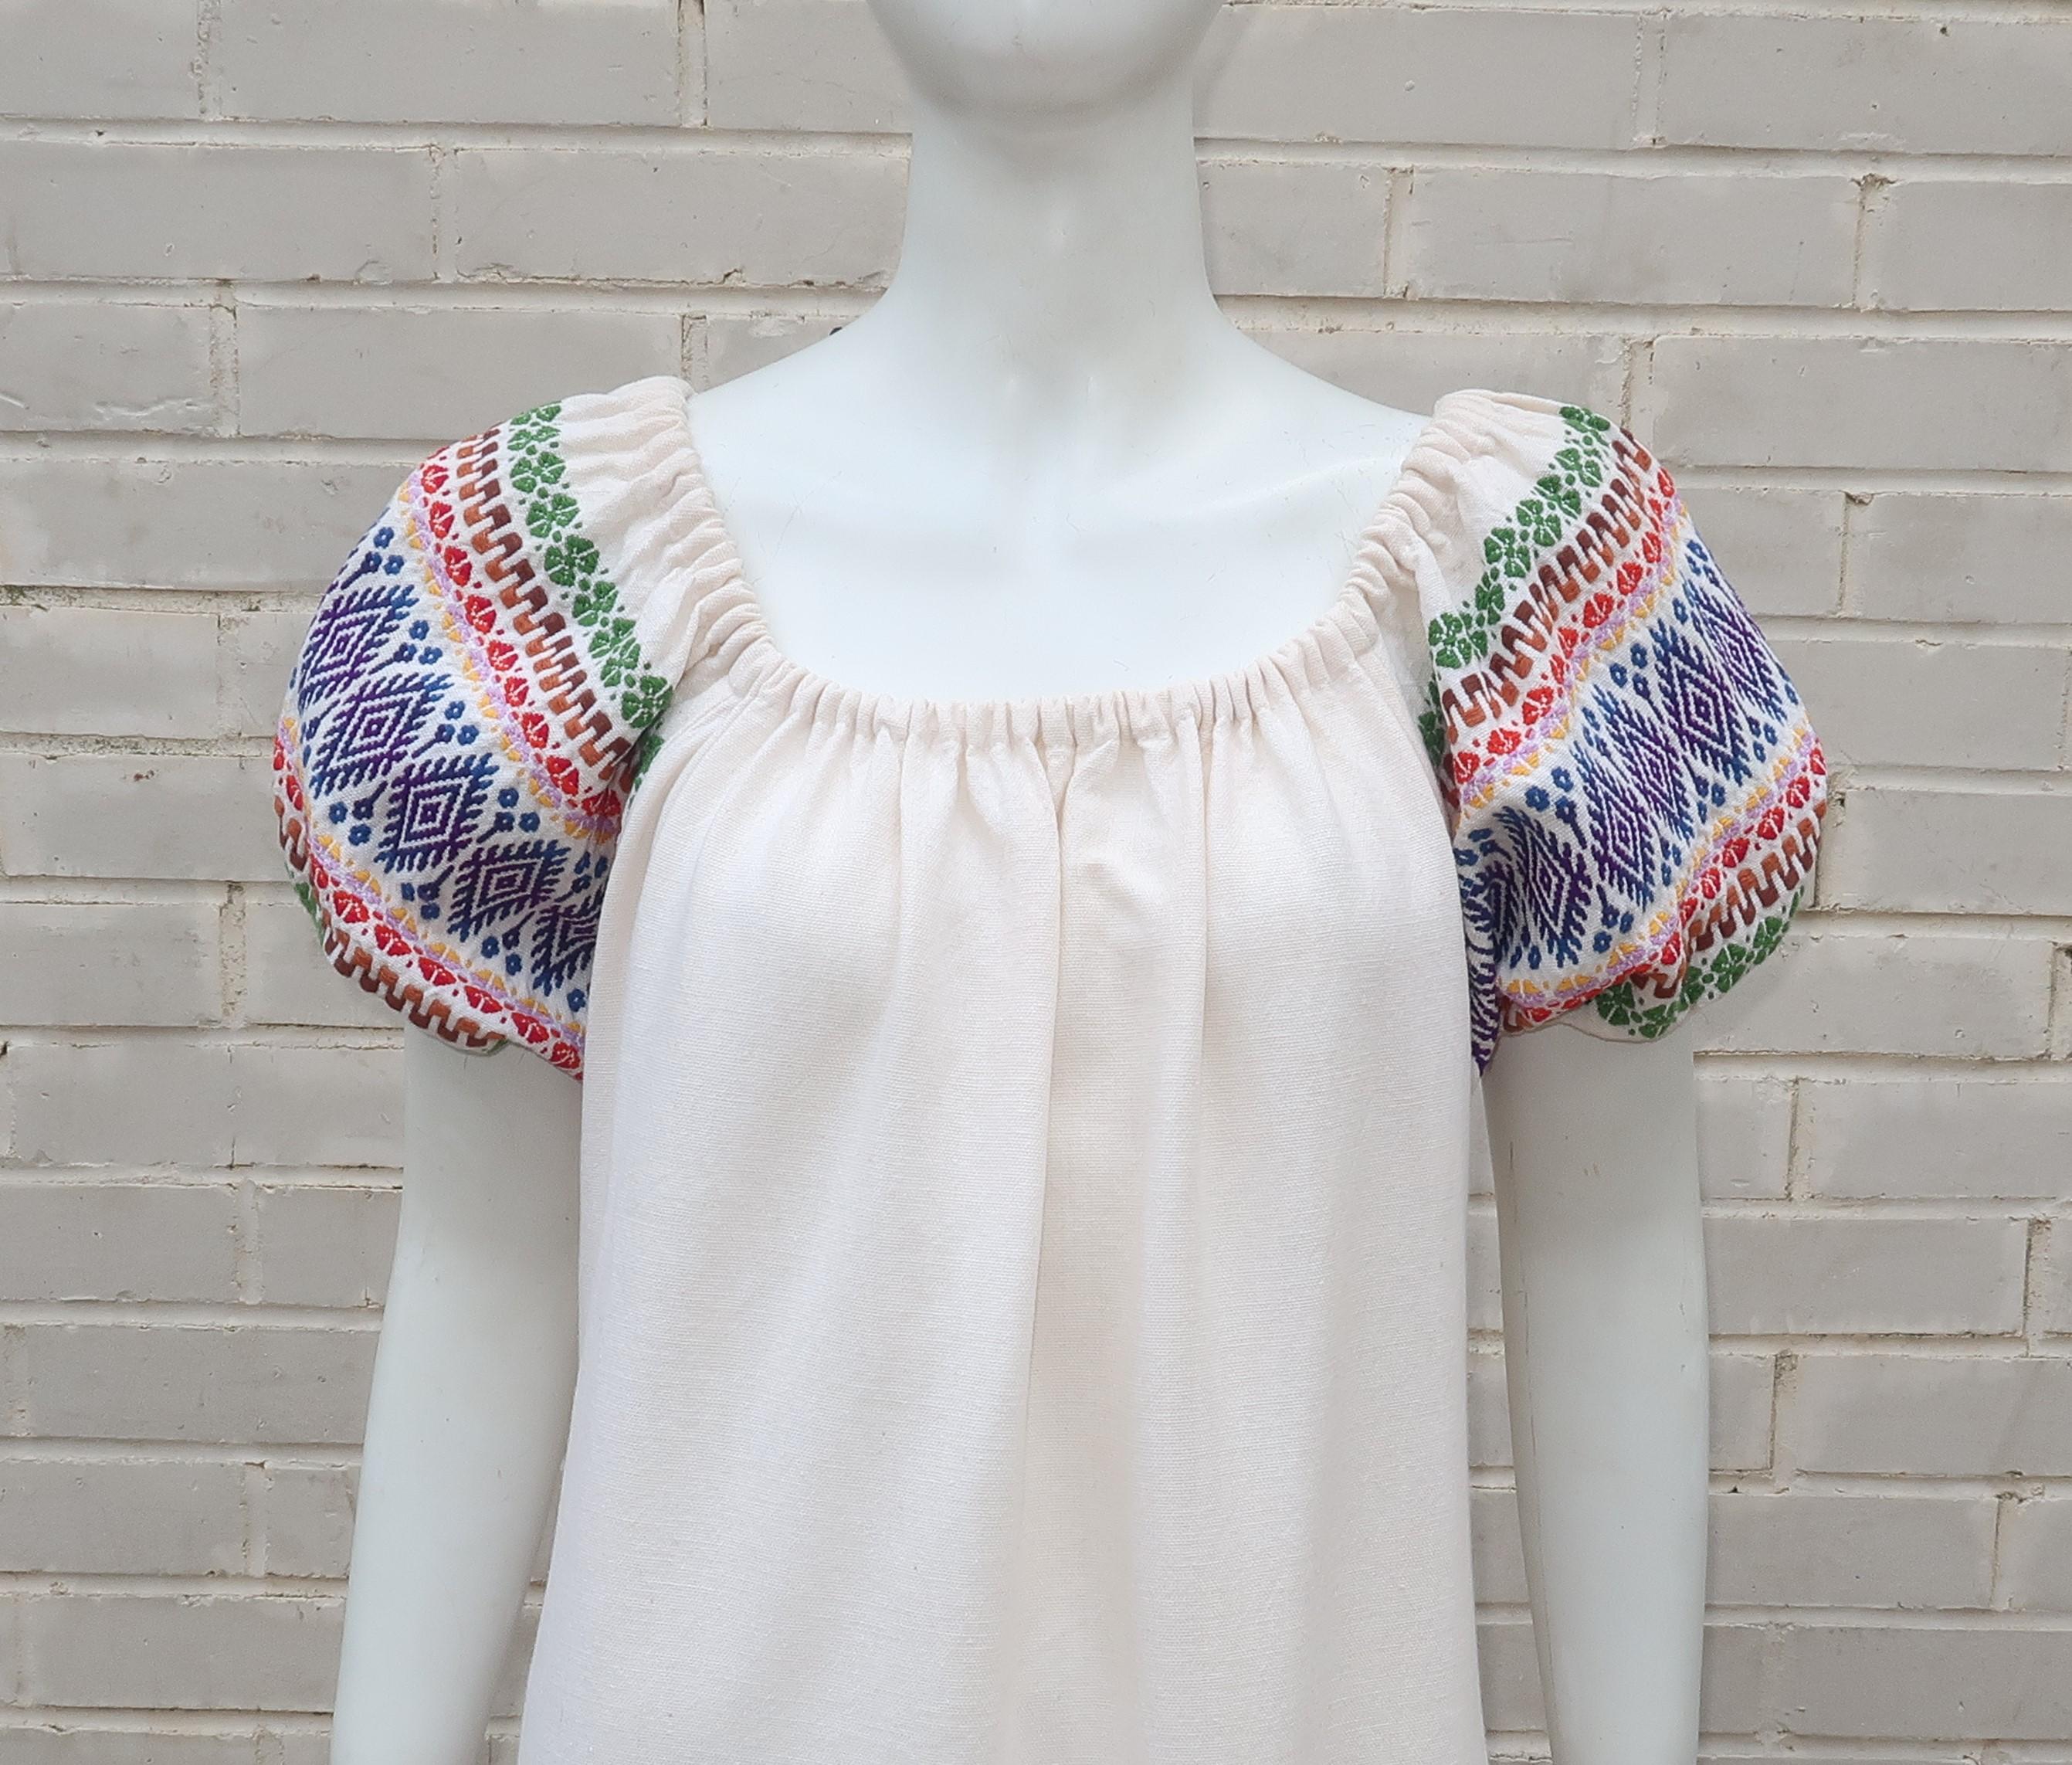 A colorful boho look with a Latin American spin ... this C.1970 Guatemalan maxi dress has an easy smock style silhouette with a relaxed elasticized neckline and short balloon sleeves.  The traditional woven pattern on the sleeves and at the hem